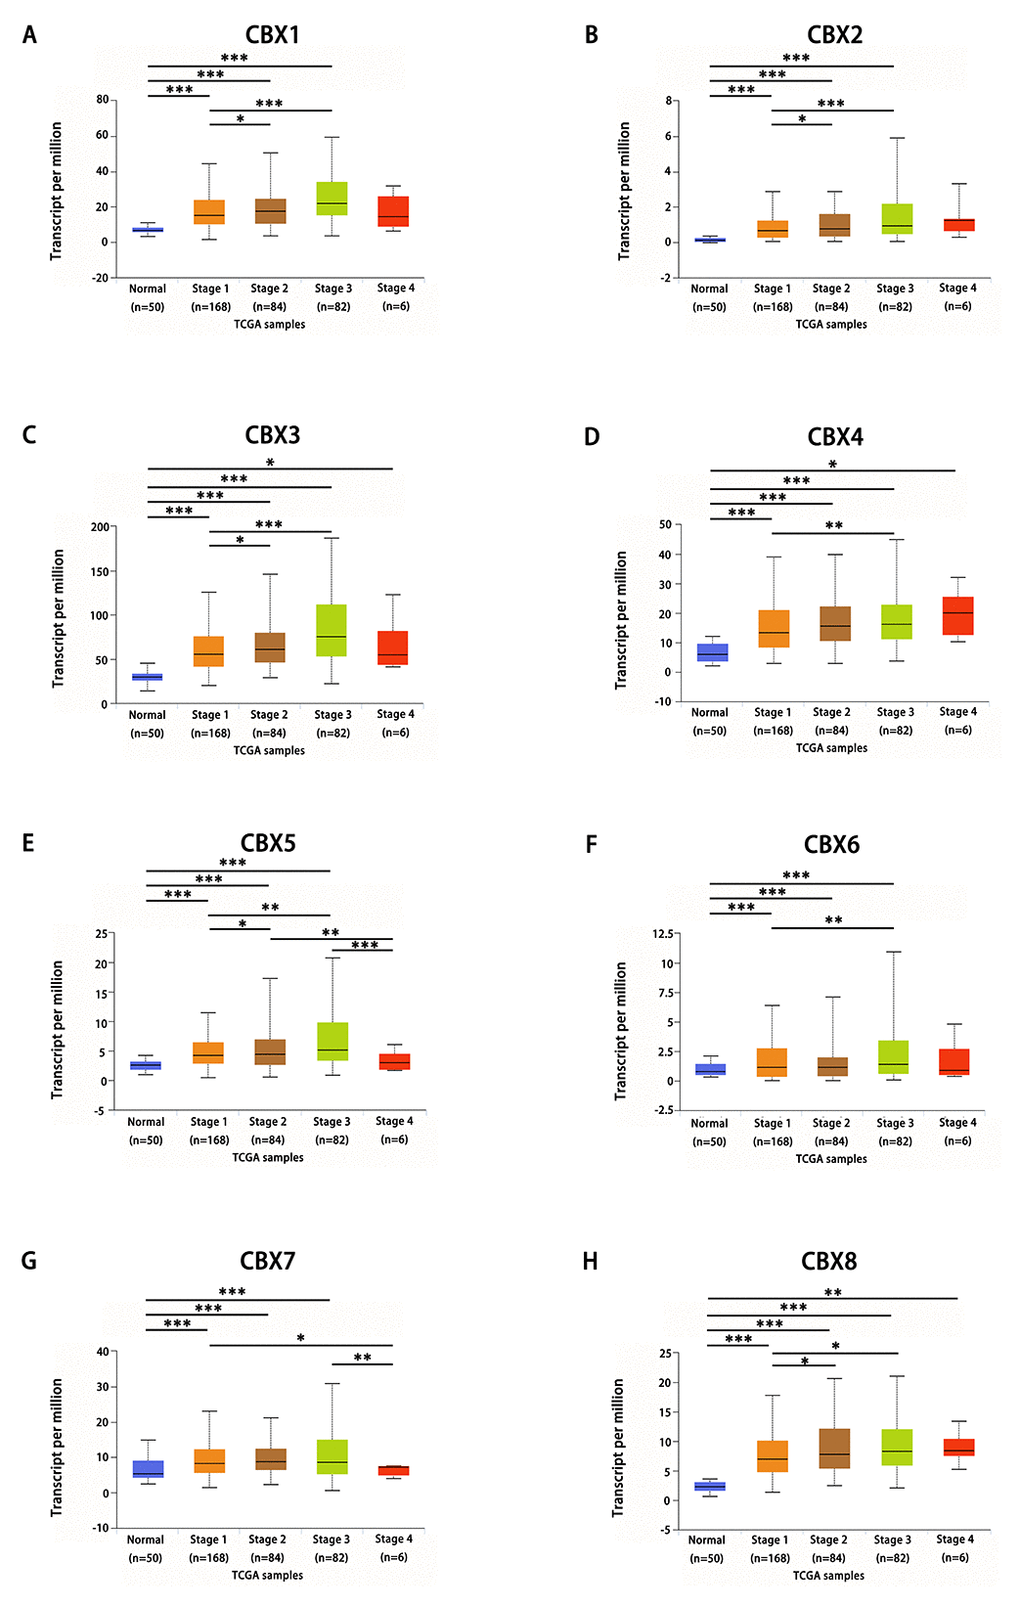 Relationship between mRNA expression of distinct CBXs family members and individual cancer stages of HCC patients. mRNA expressions of 8 CBXs family members were remarkably correlated with patients’ individual cancer stages, patients who were in more advanced stages tended to express higher mRNA expression of CBXs. The highest mRNA expressions of CBX4/8 were found in stage 4 (D, H), while the highest mRNA expressions of CBX1/2/3/5/6/7 were found in stage 3 (A-C, E-G). *ppp